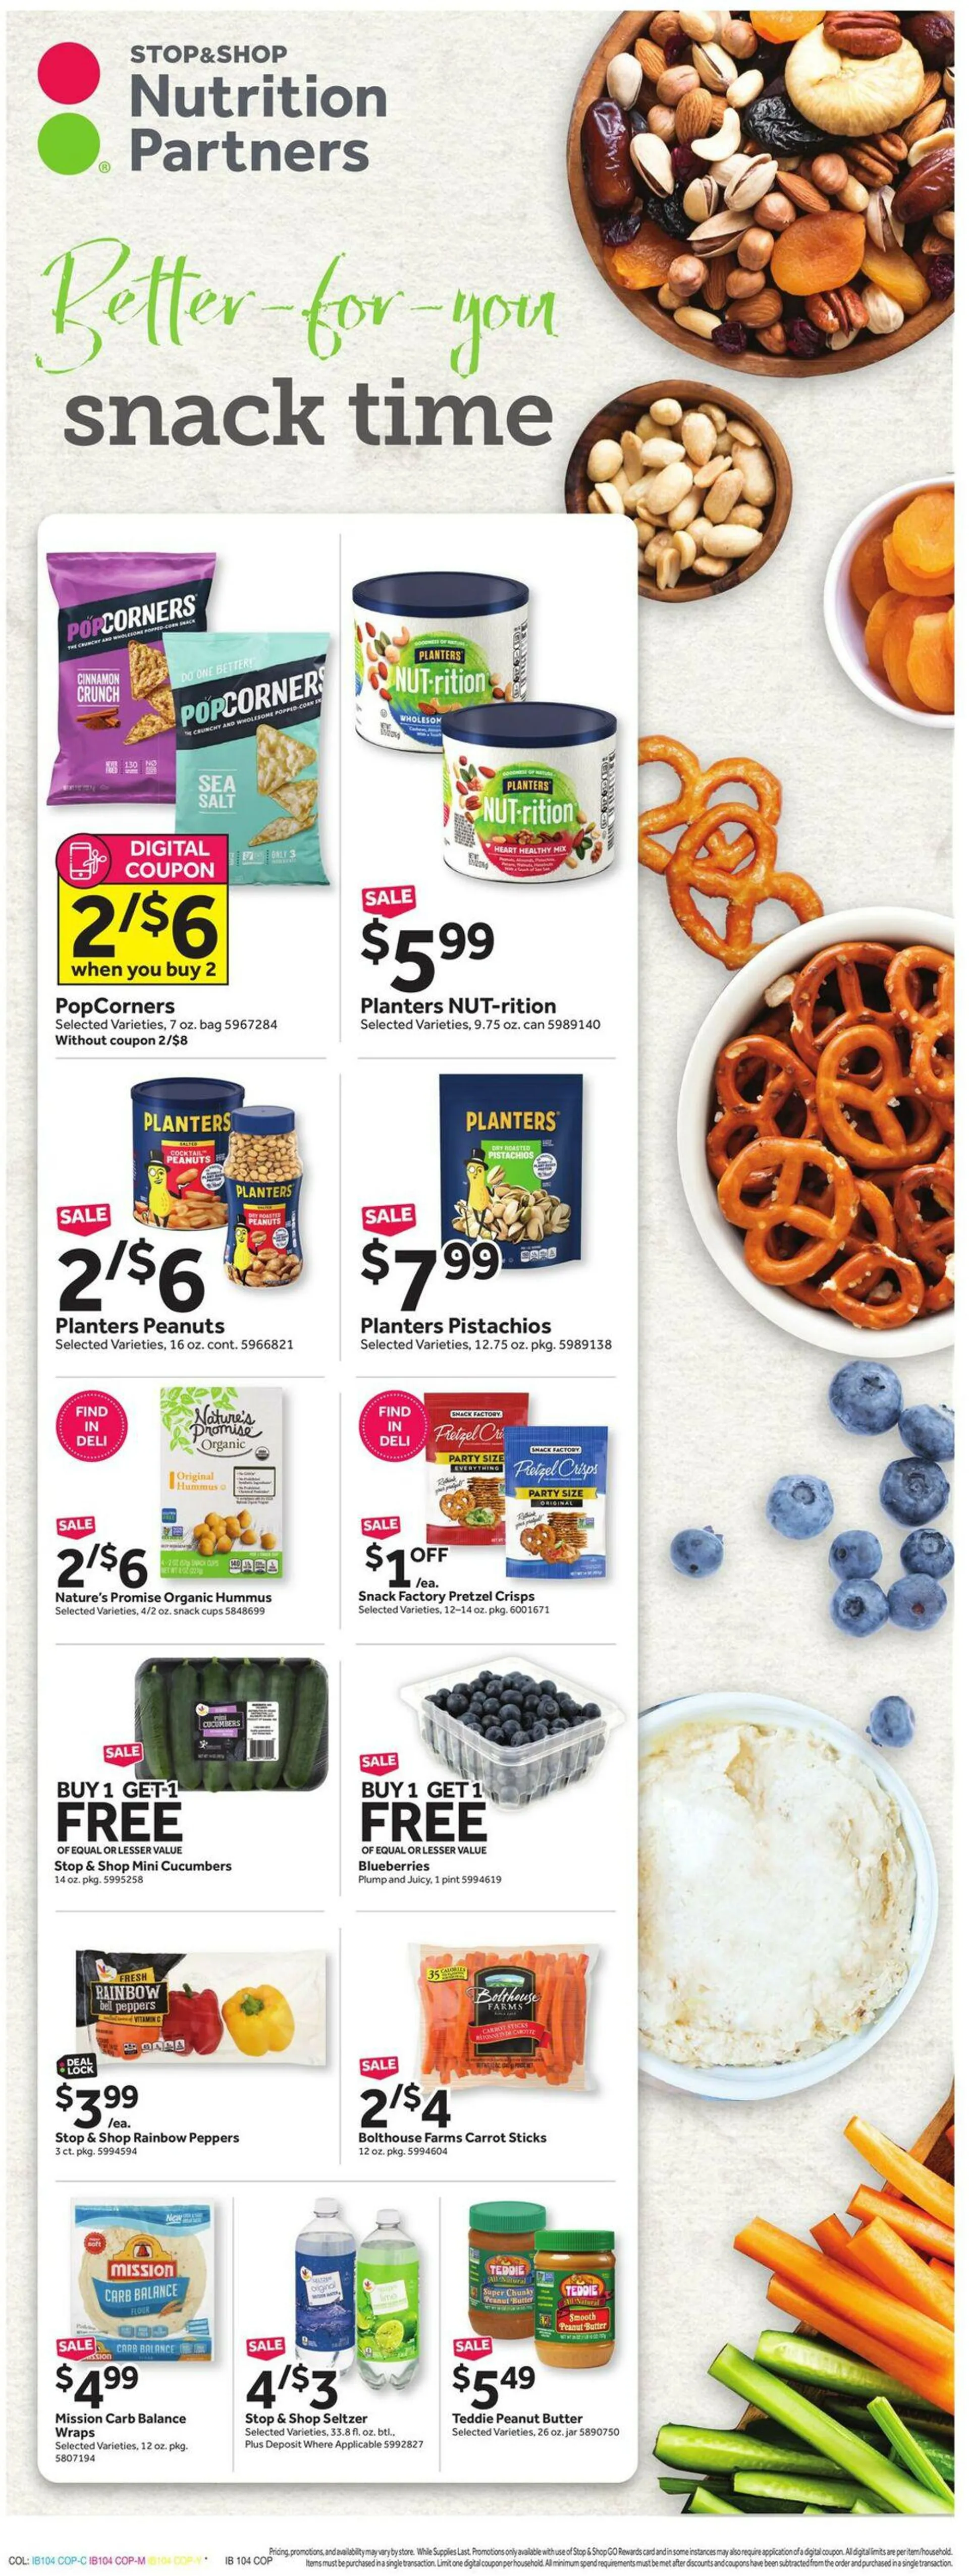 Stop and Shop Current weekly ad - 8